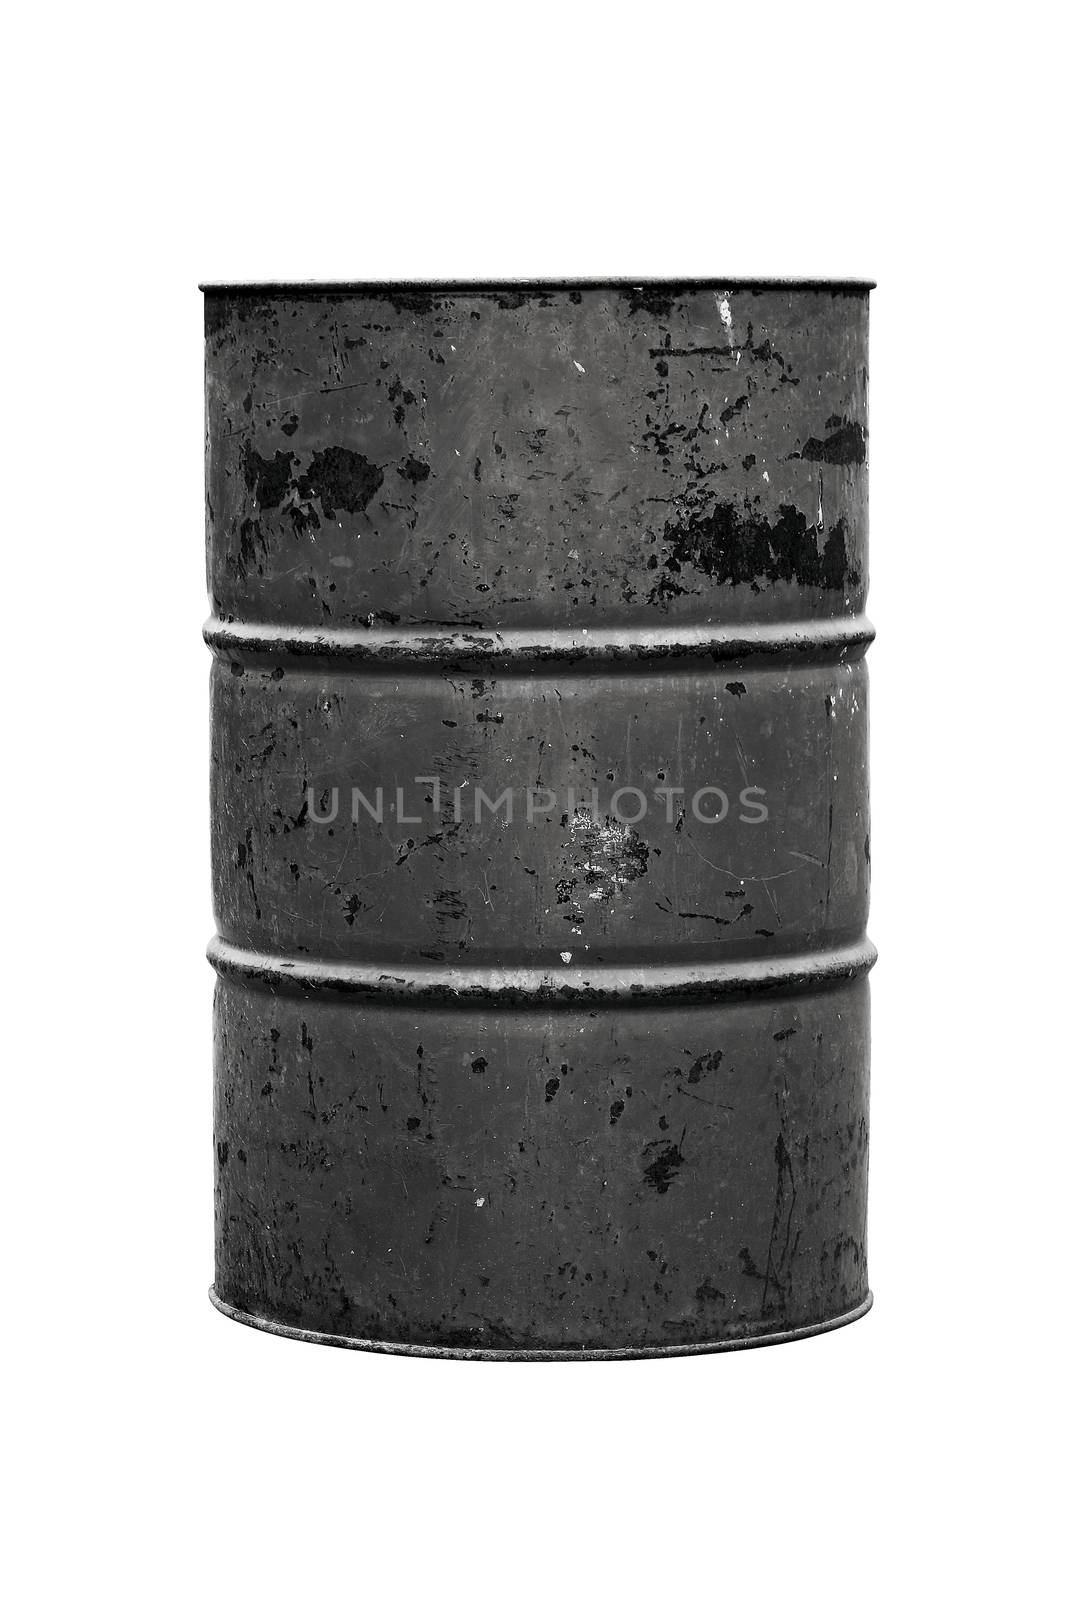 Barrel Oil black or dark Old isolated on background white by cgdeaw